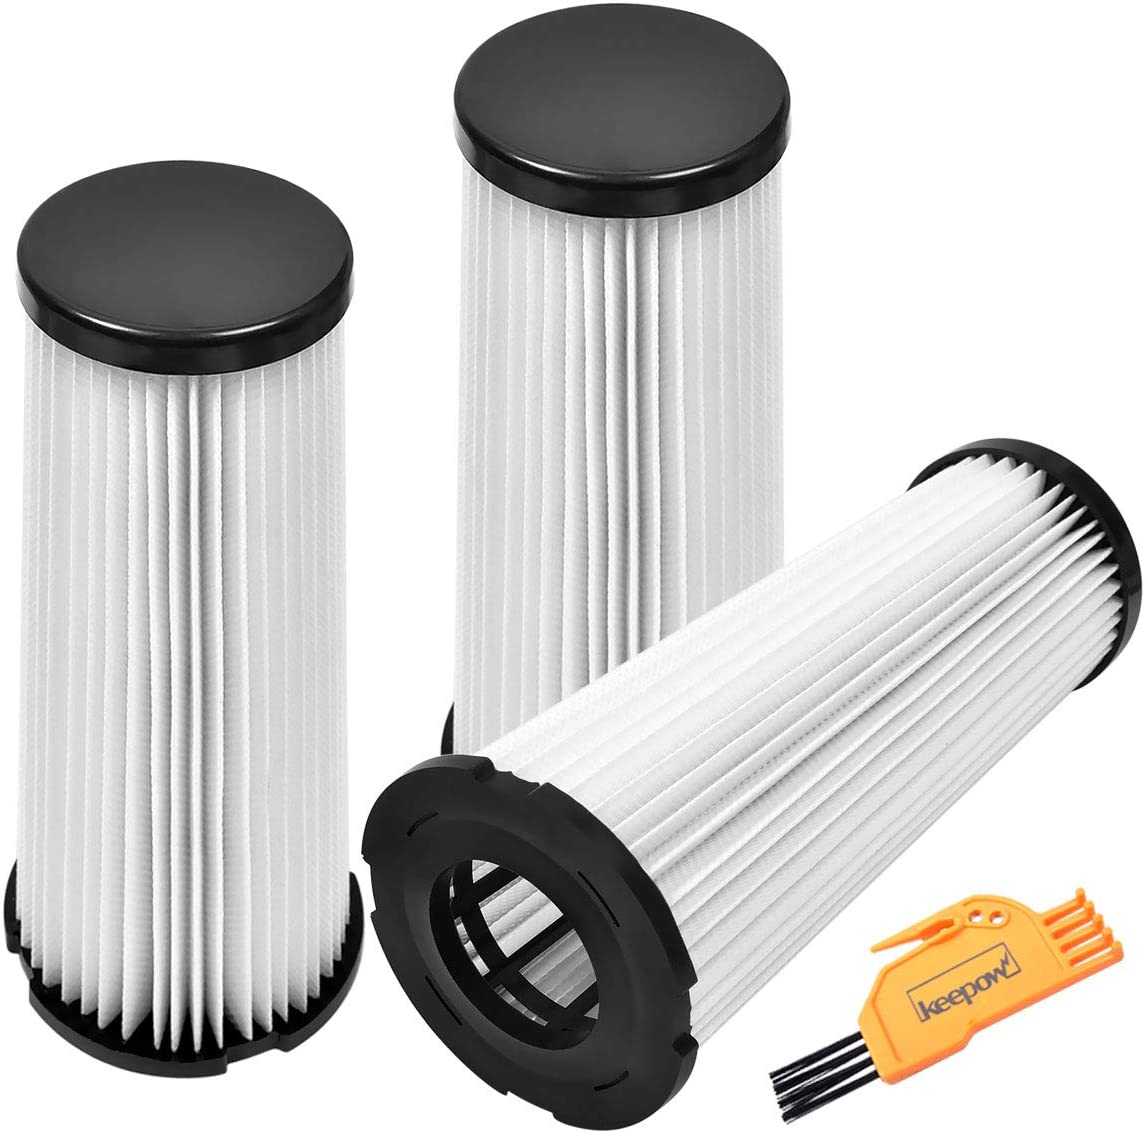 KEEPOW 1305F F1 Replacement HEPA Filter for Dirt Devil